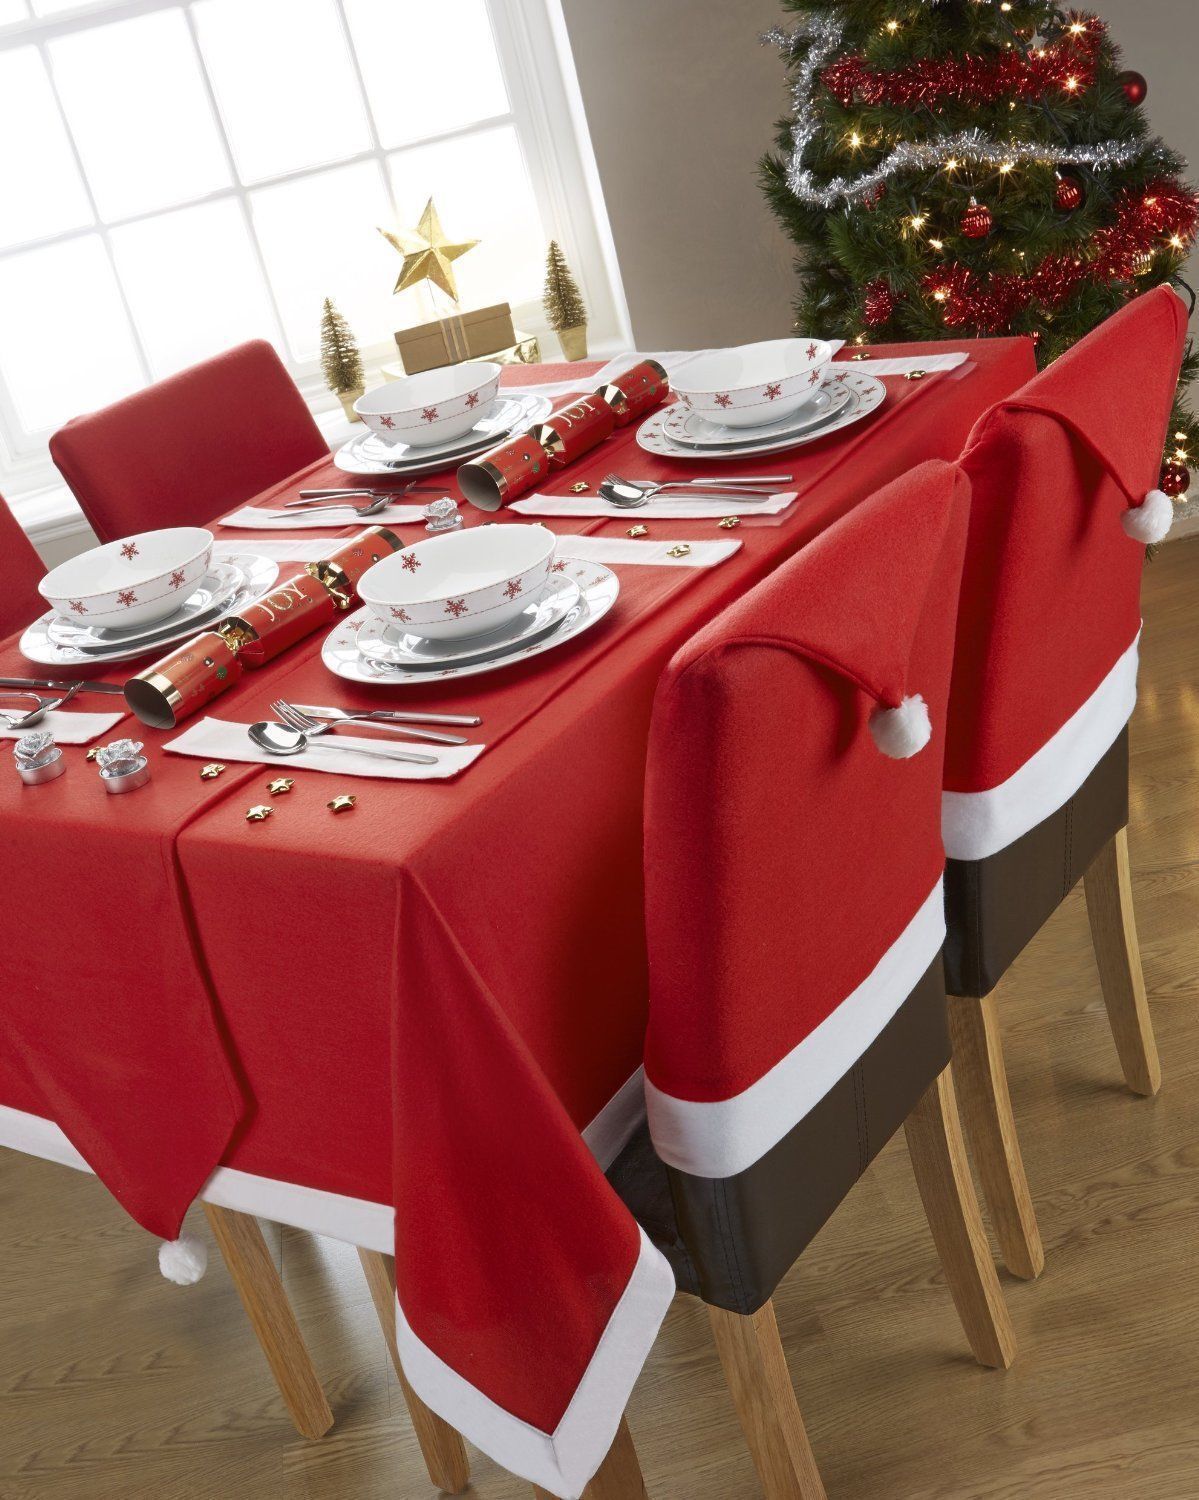 Christmas Chair Covers Tablecloth Runner Decoration Xmas Dinner Party Santa Gift, Table Runner (34 x 176cm)